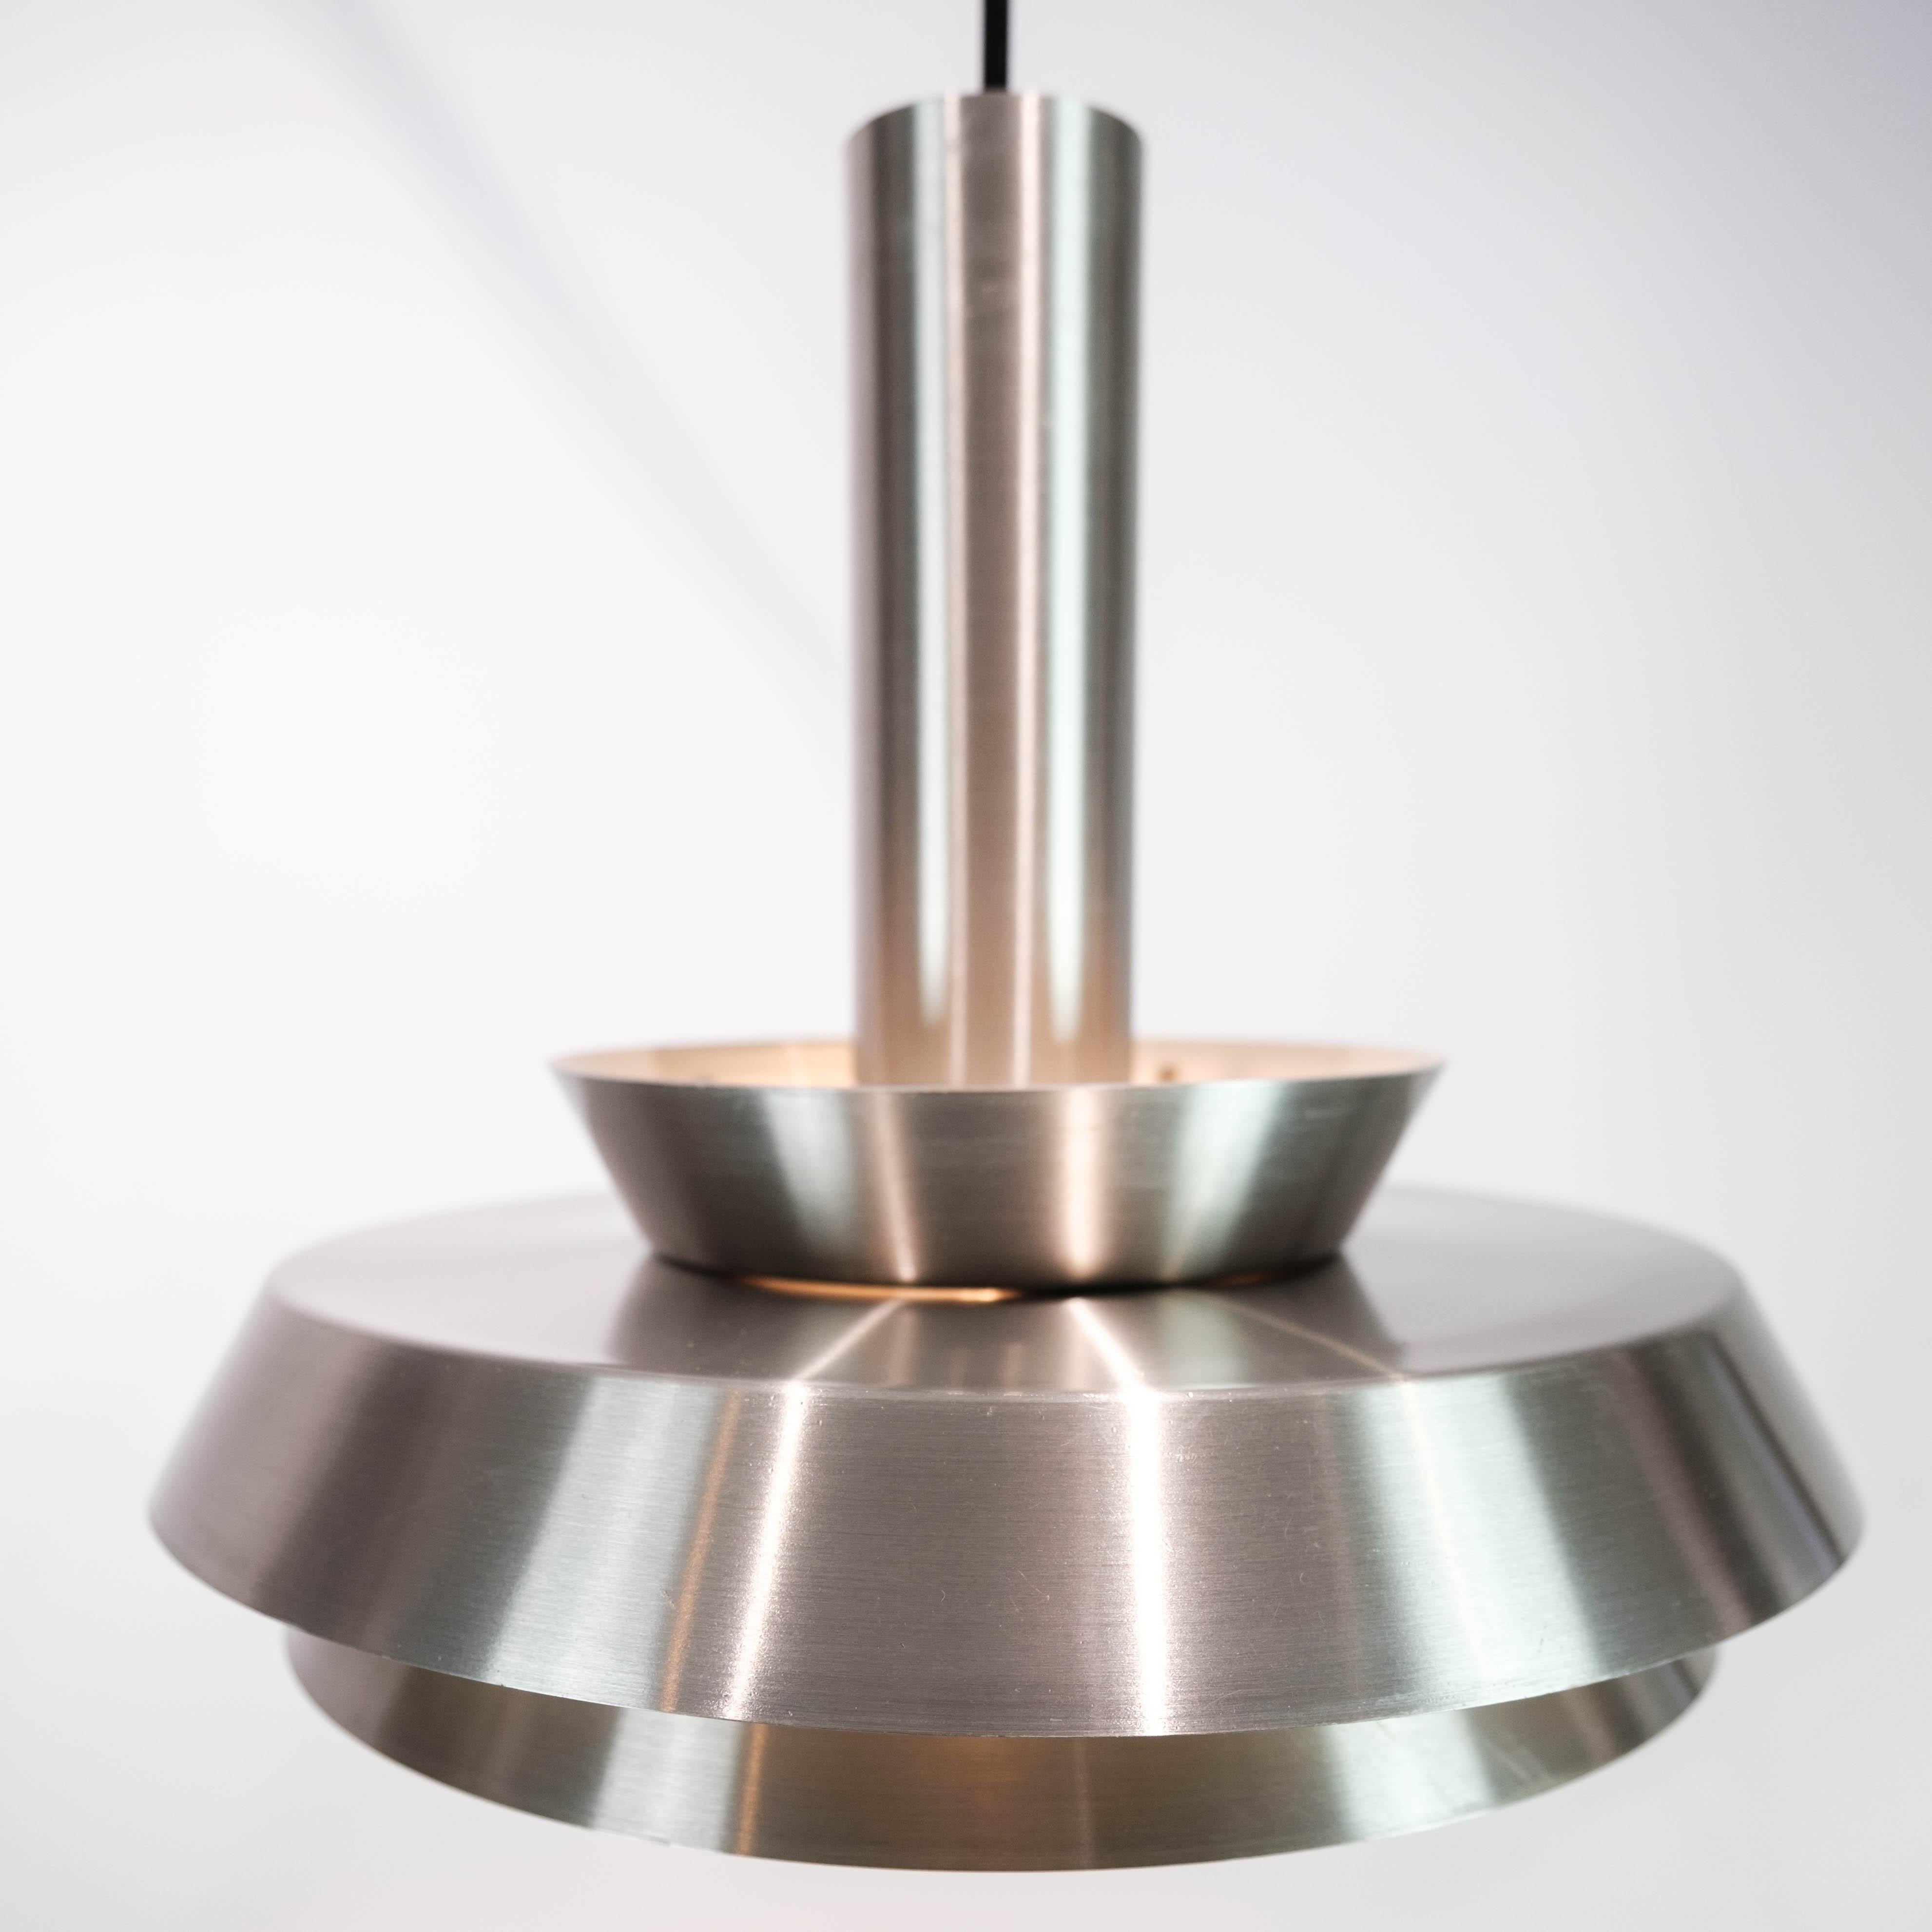 Mid-20th Century Ceiling Pendant in Steel of Danish Design from the 1960s For Sale